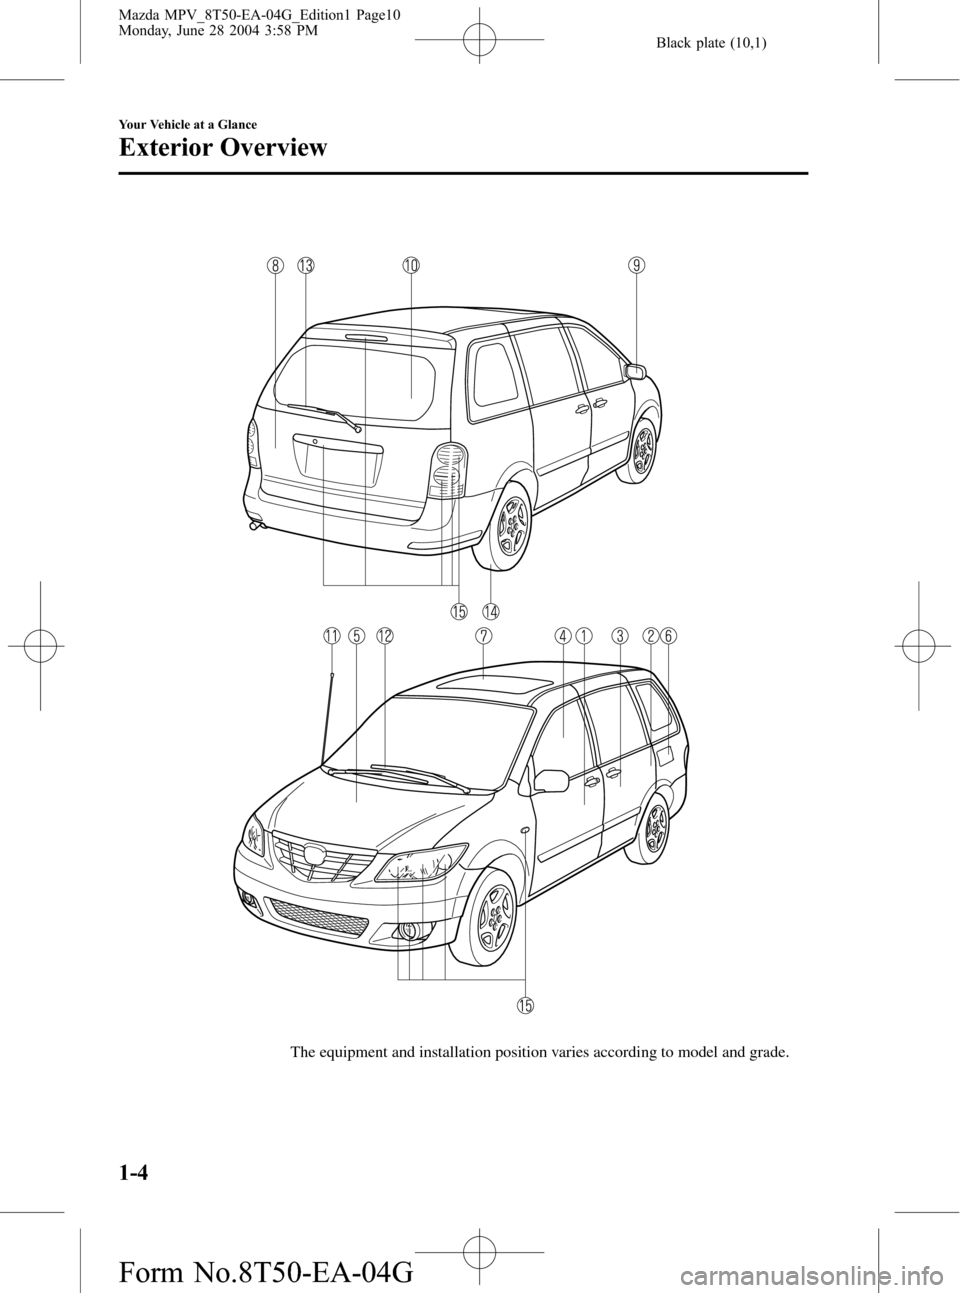 MAZDA MODEL MPV 2005  Owners Manual (in English) Black plate (10,1)
The equipment and installation position varies according to model and grade.
1-4
Your Vehicle at a Glance
Exterior Overview
Mazda MPV_8T50-EA-04G_Edition1 Page10
Monday, June 28 200